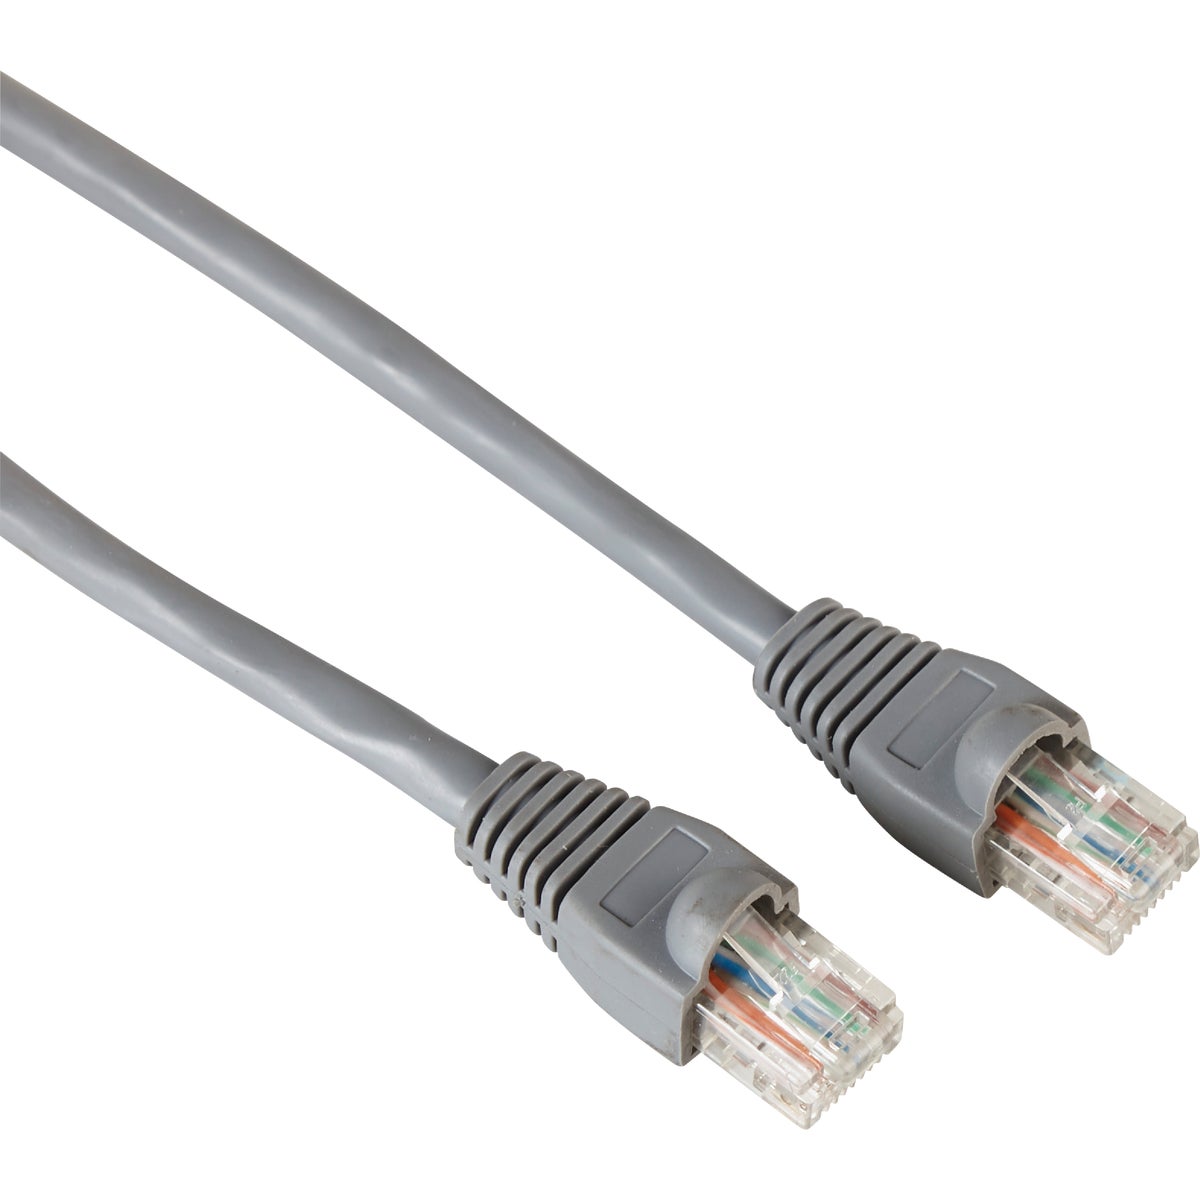 Item 502439, CAT-6 network cable ideal for connecting an internet-enabled device to a 